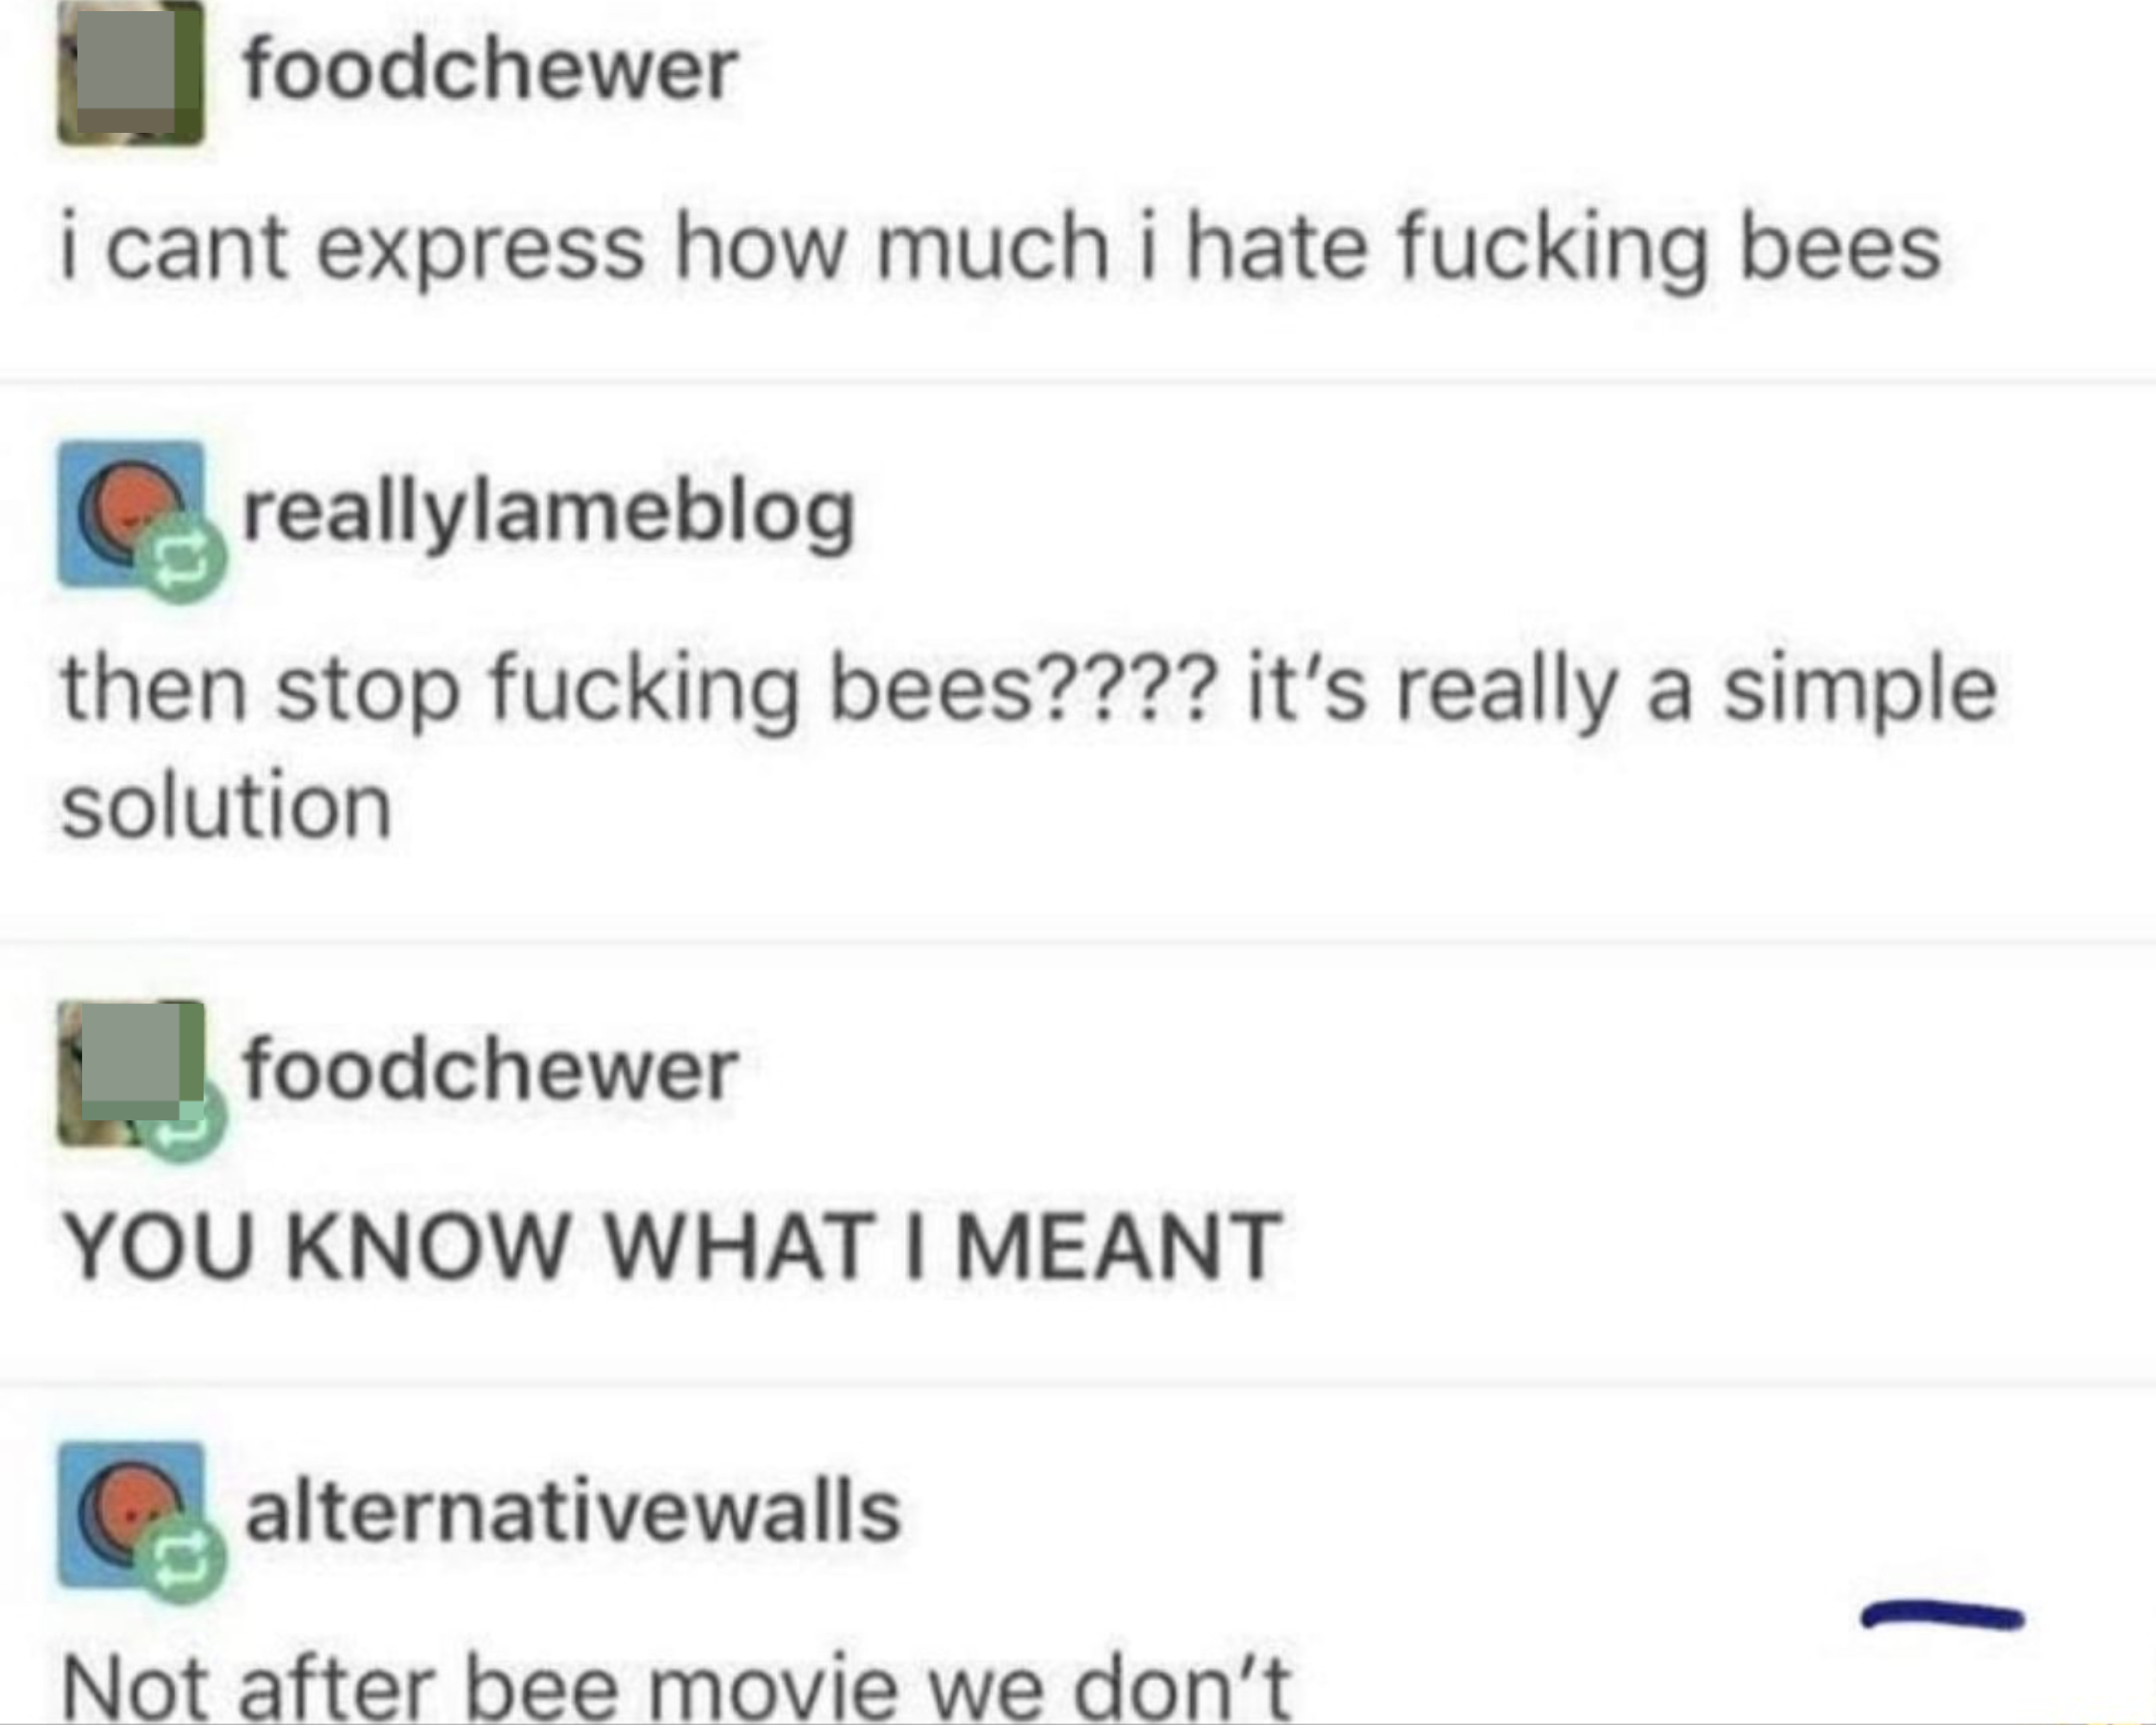 &quot;i cant express how much i hate fucking bees&quot; &quot;then stop fucking bees???? it&#x27;s really a simple solution&quot; &quot;YOU KNOW WHAT I MEANT&quot; &quot;Not after bee movie we don&#x27;t&quot;